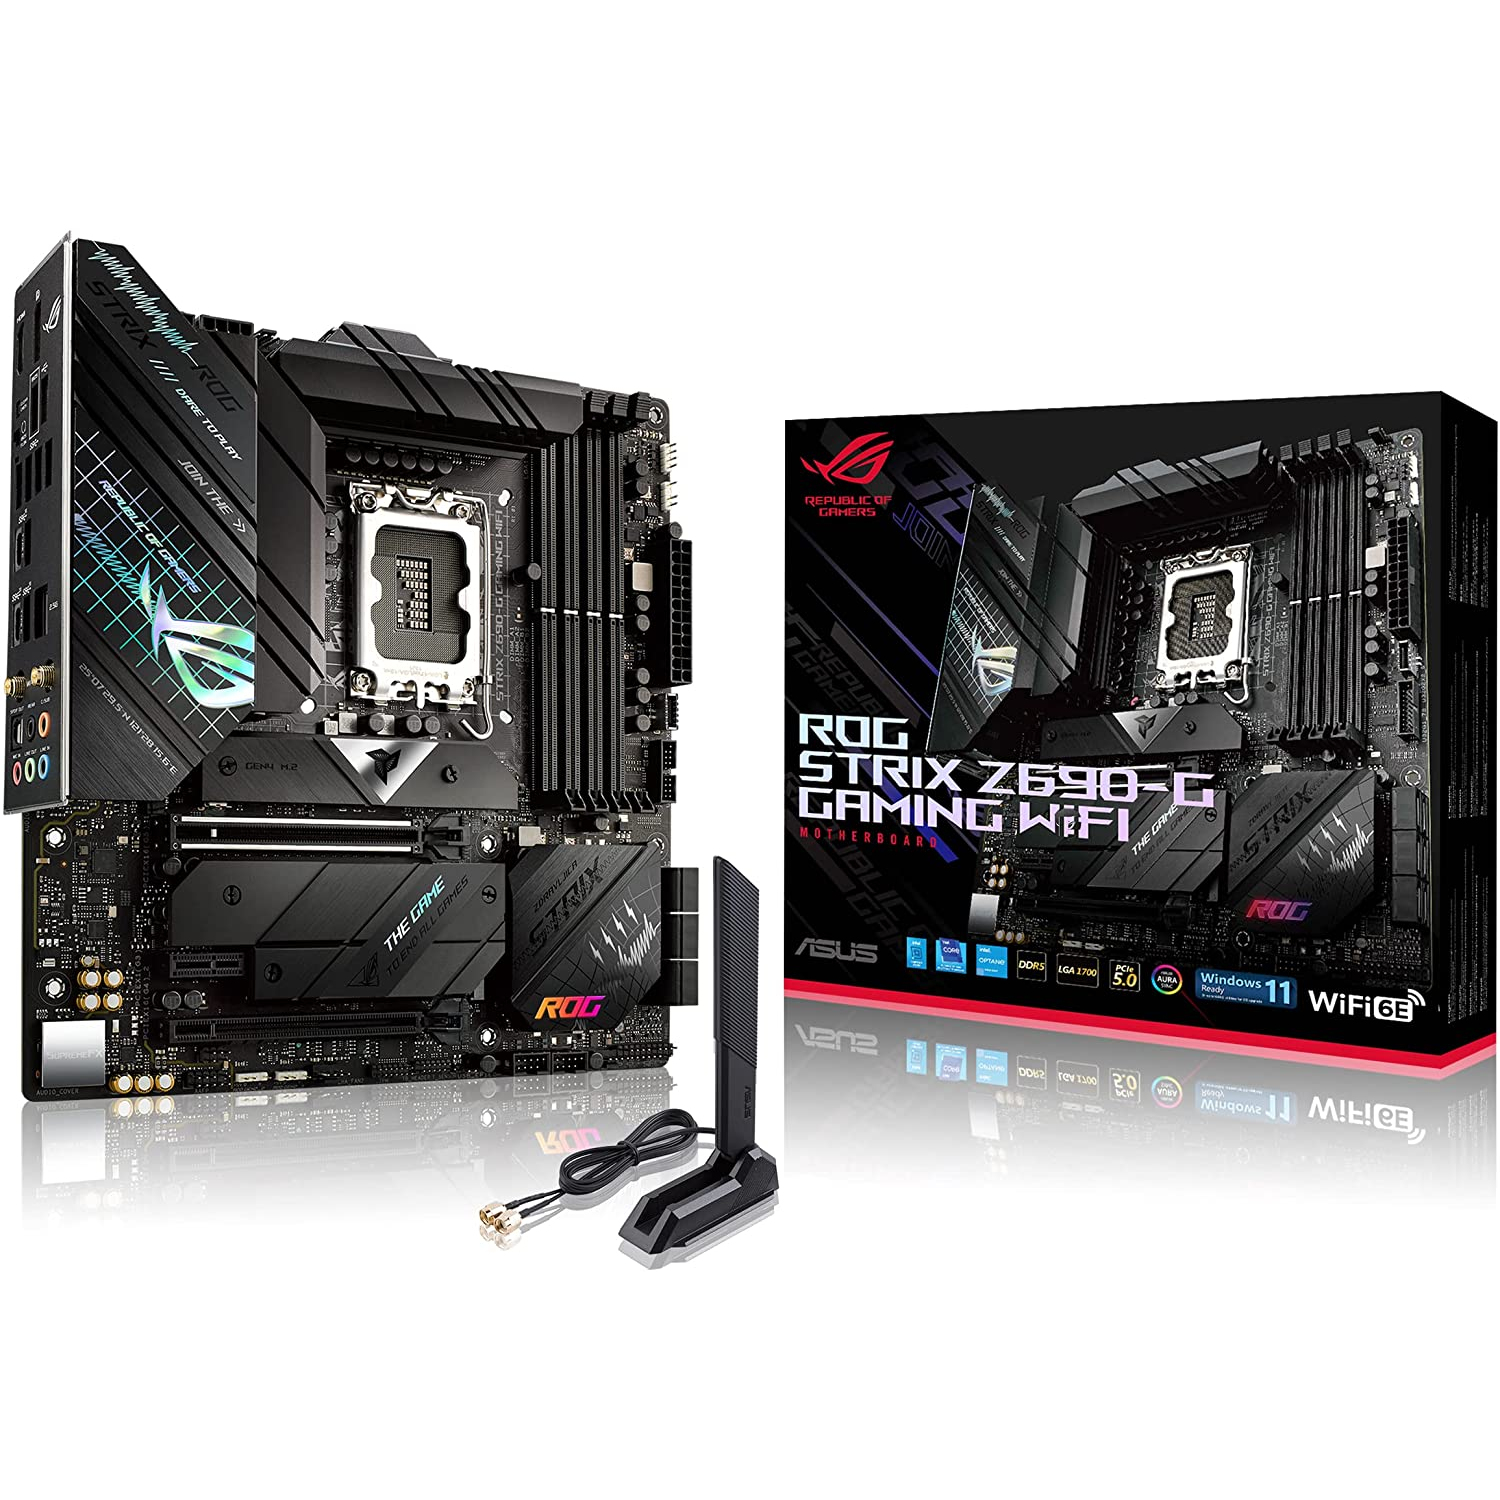 The Best gaming PC How to build a PC to handle the best games in 2022 1